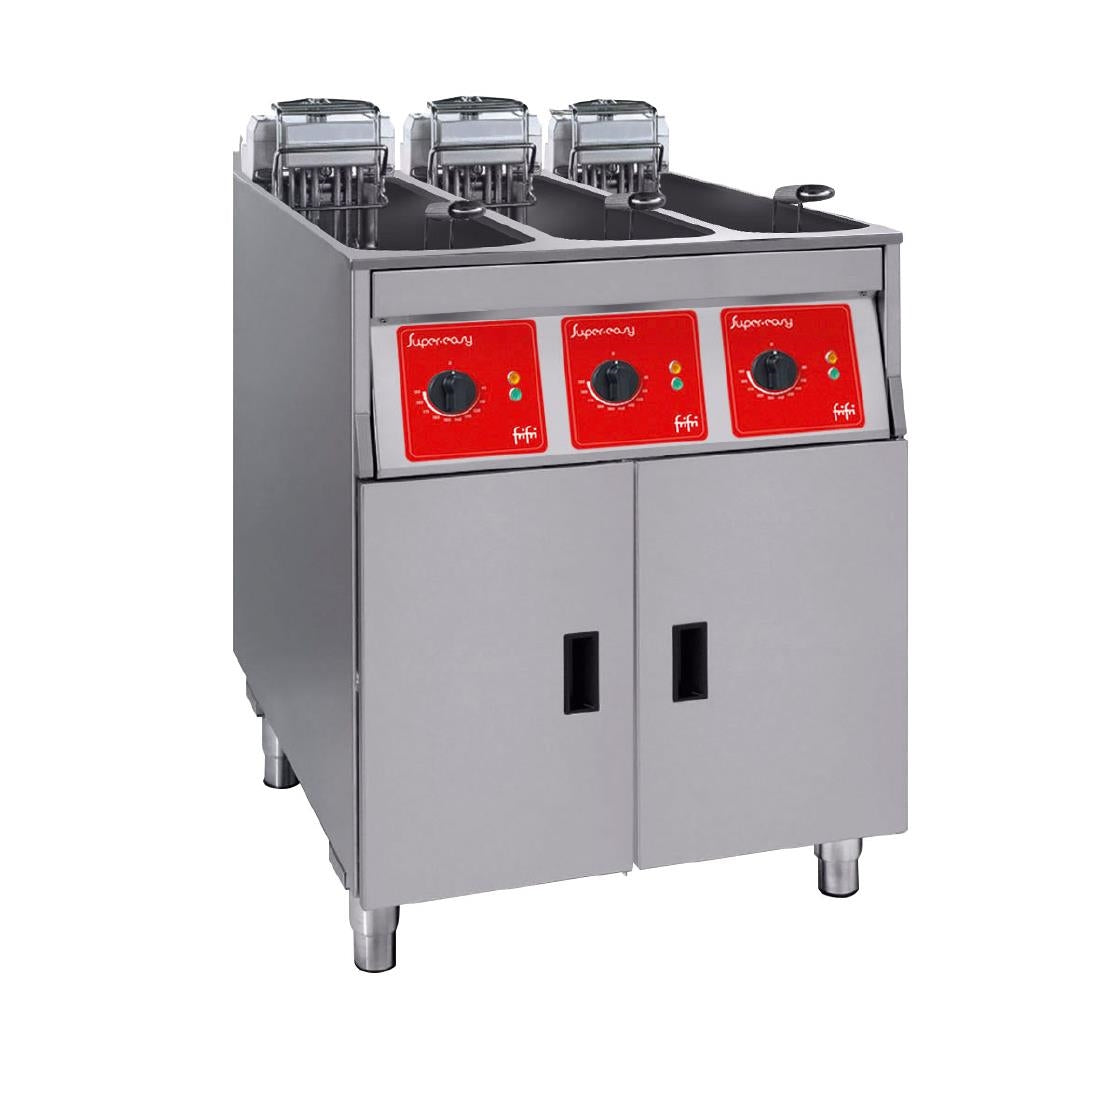 HS075-3PH FriFri Super Easy 633 Electric Free-standing Fryer Triple Tank Triple Basket with Filtration 33kW Three Phase